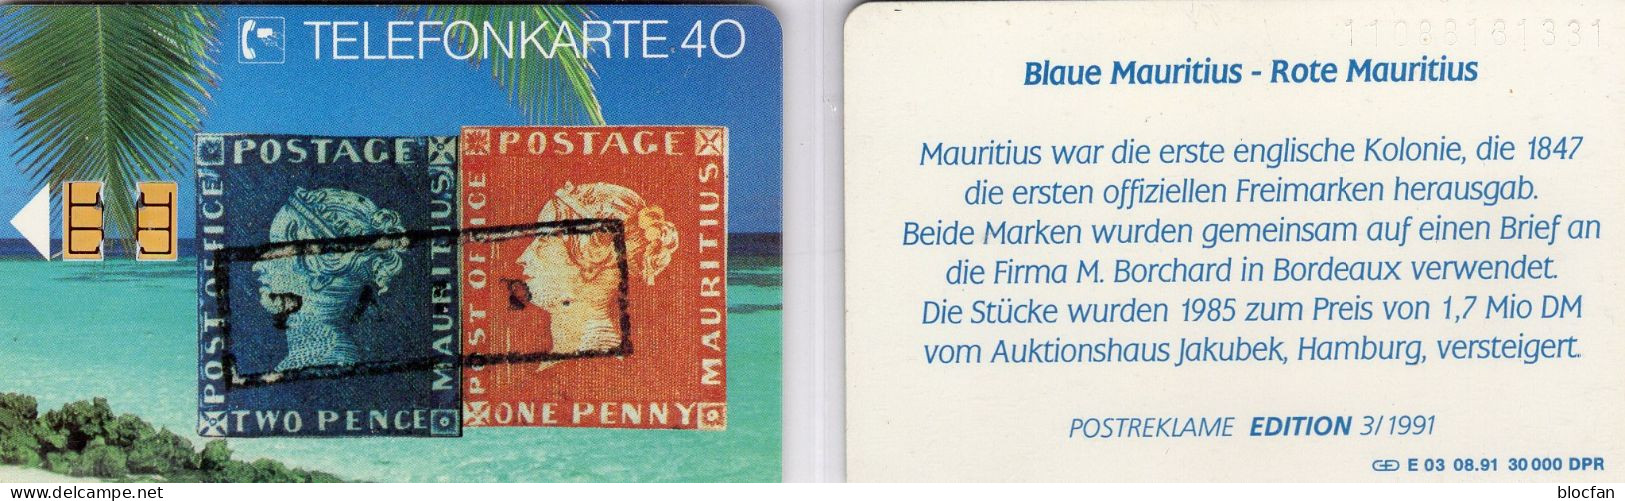 Blaue/rote Mauritius TK E03/1991 30.000Expl. ** 25€ Edition1 Kolonie Der UK/GB TC History Stamps On Phonecard Of Germany - E-Series : Edition - D. Postreklame